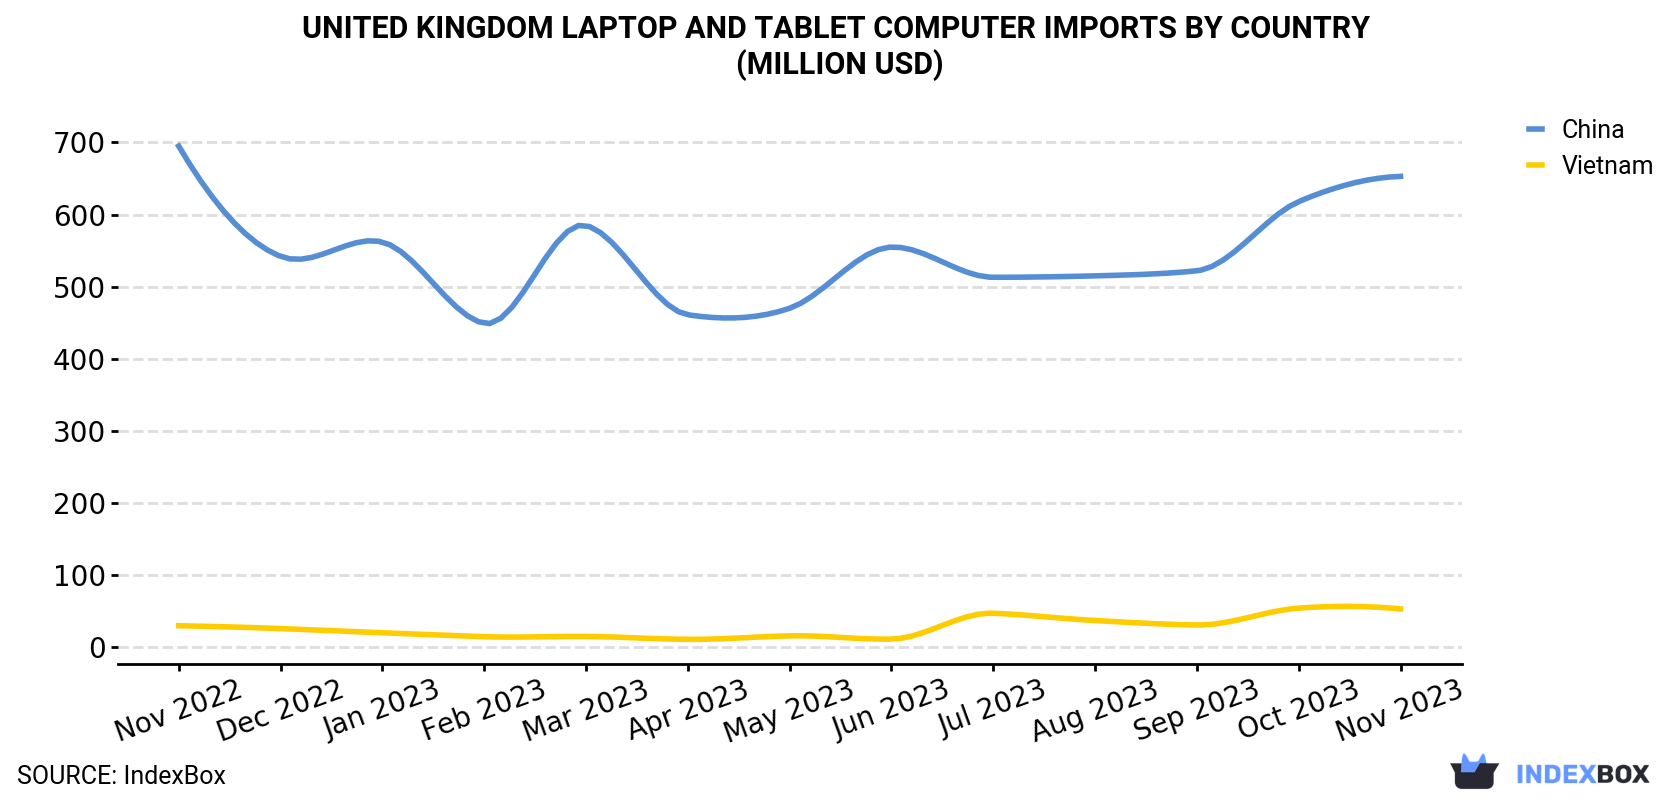 United Kingdom Laptop and Tablet Computer Imports By Country (Million USD)